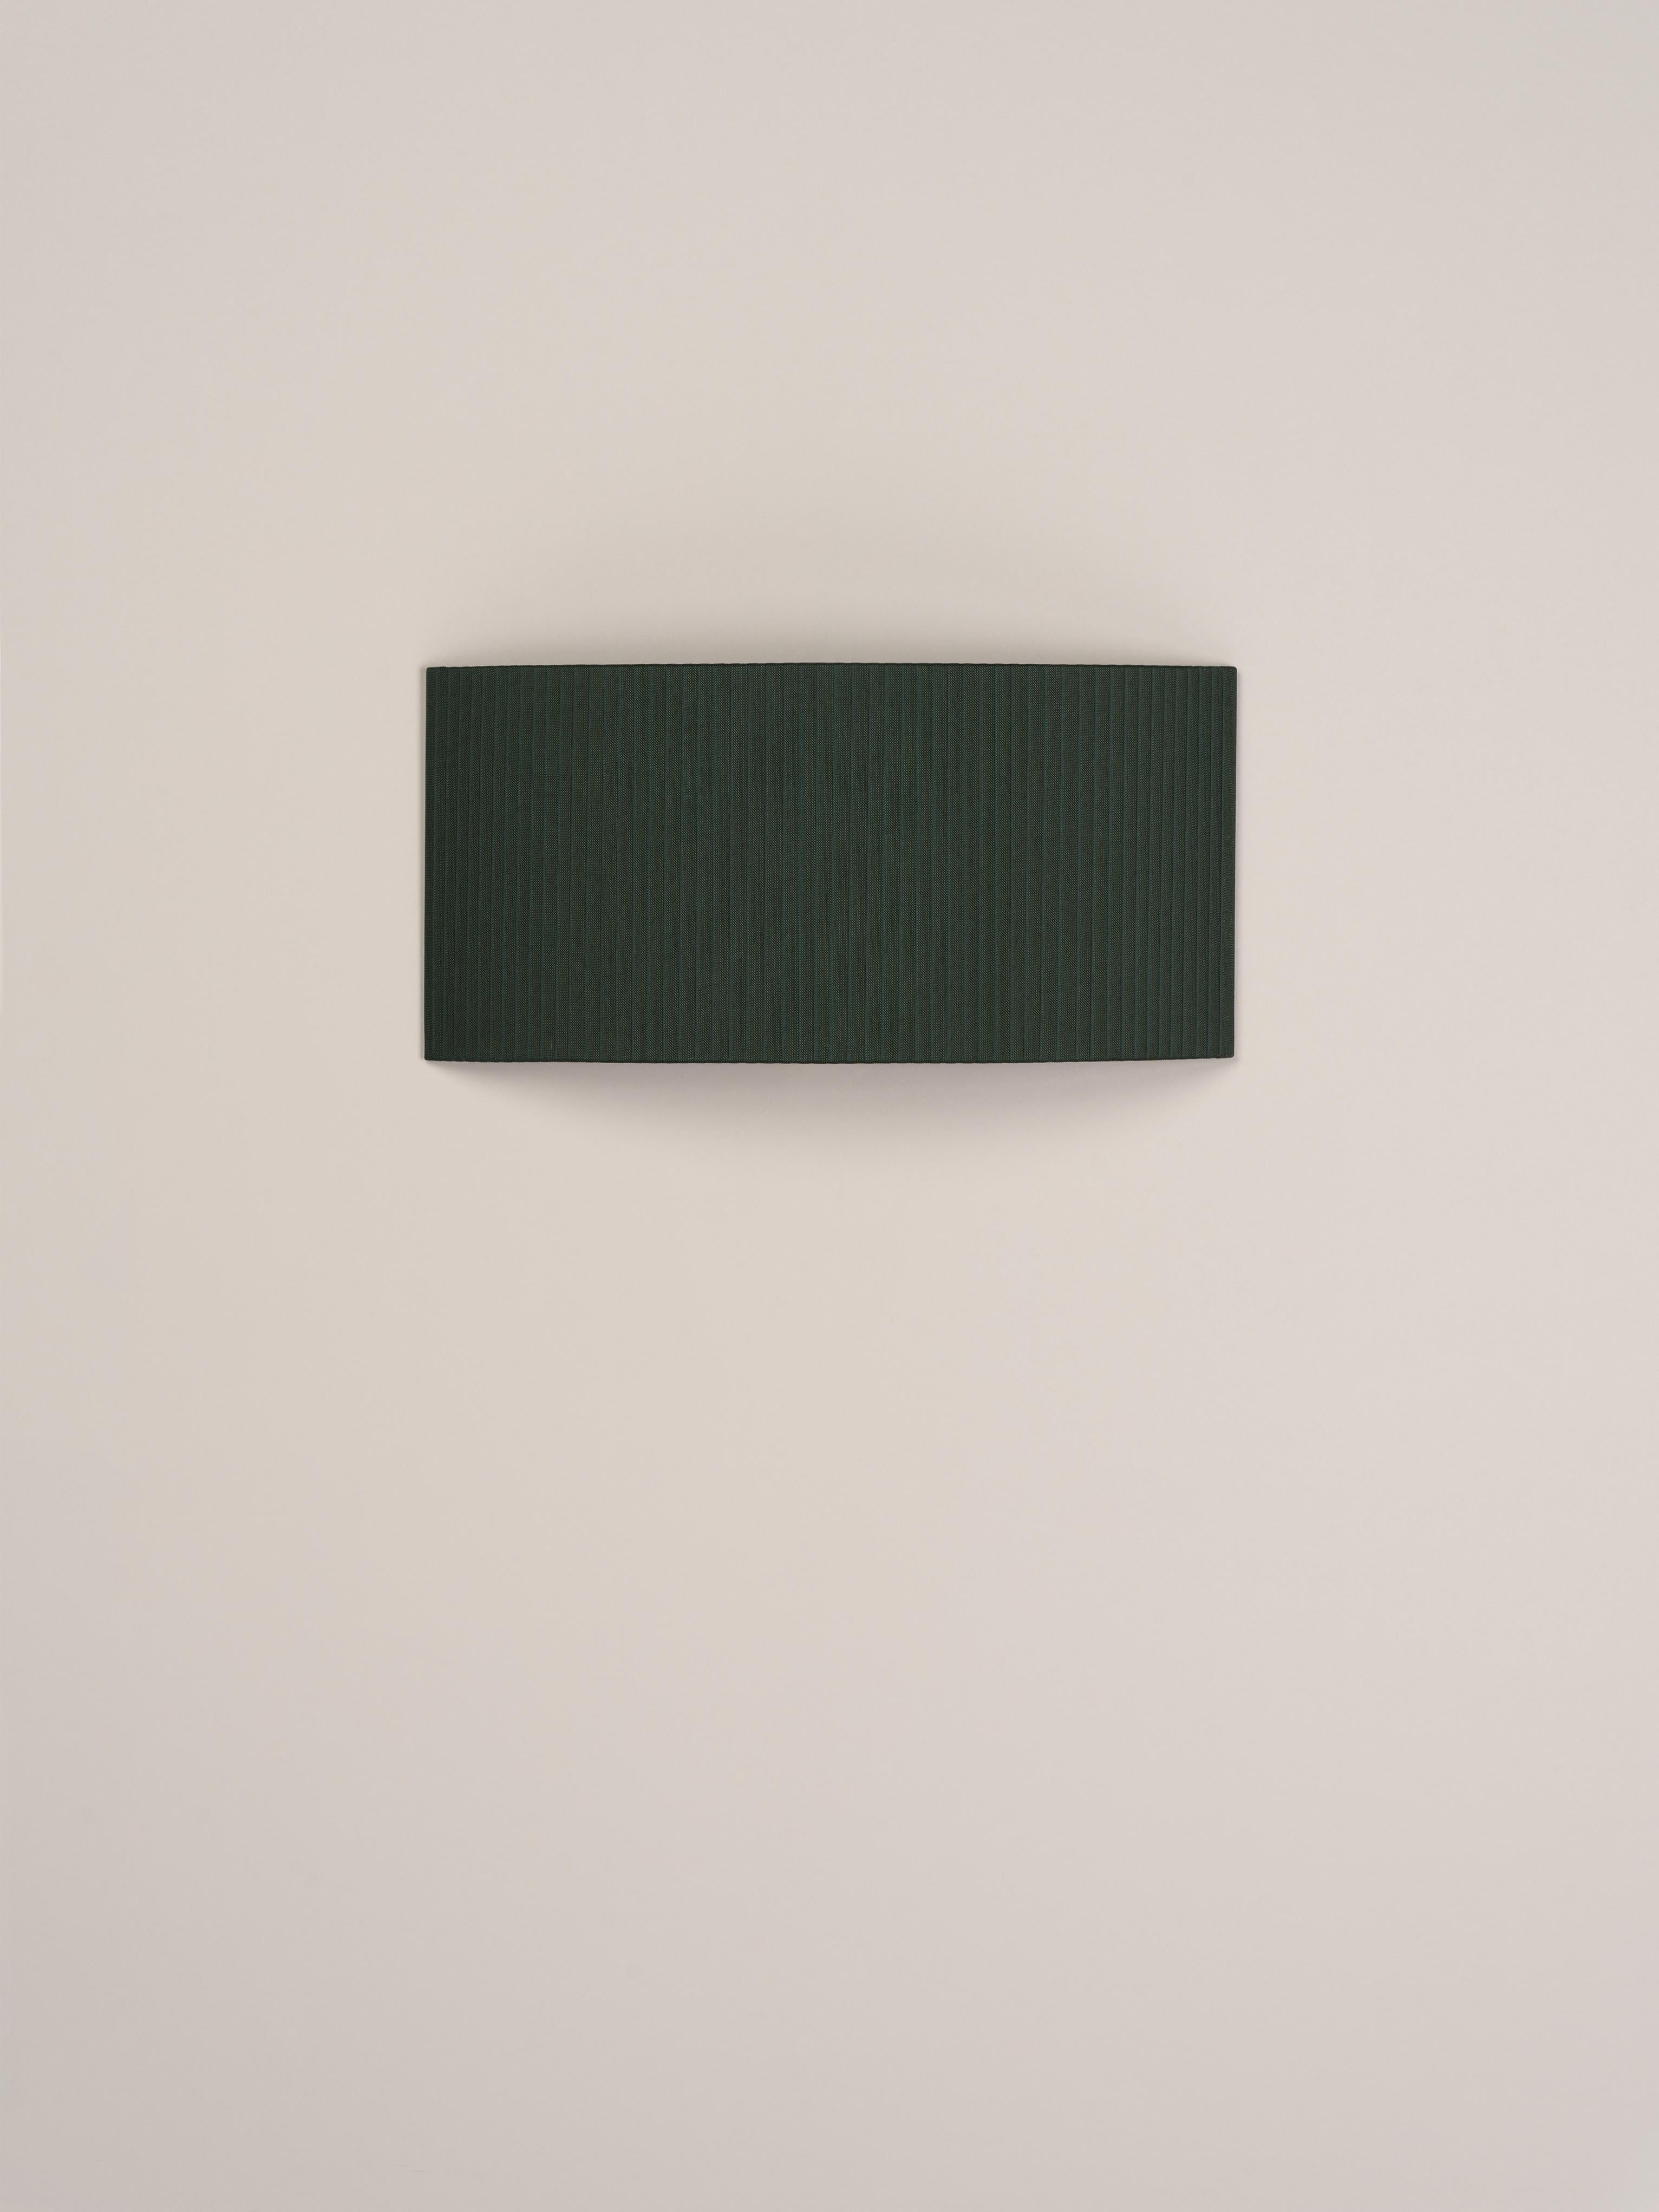 Green Comodín rectangular wall lamp by Santa & Cole
Dimensions: D 50 x W 13 x H 24 cm
Materials: Metal, ribbon.

This minimalist wall lamp humanises neutral spaces with its colourful and functional sobriety. The shade is fondly hand-ribboned,